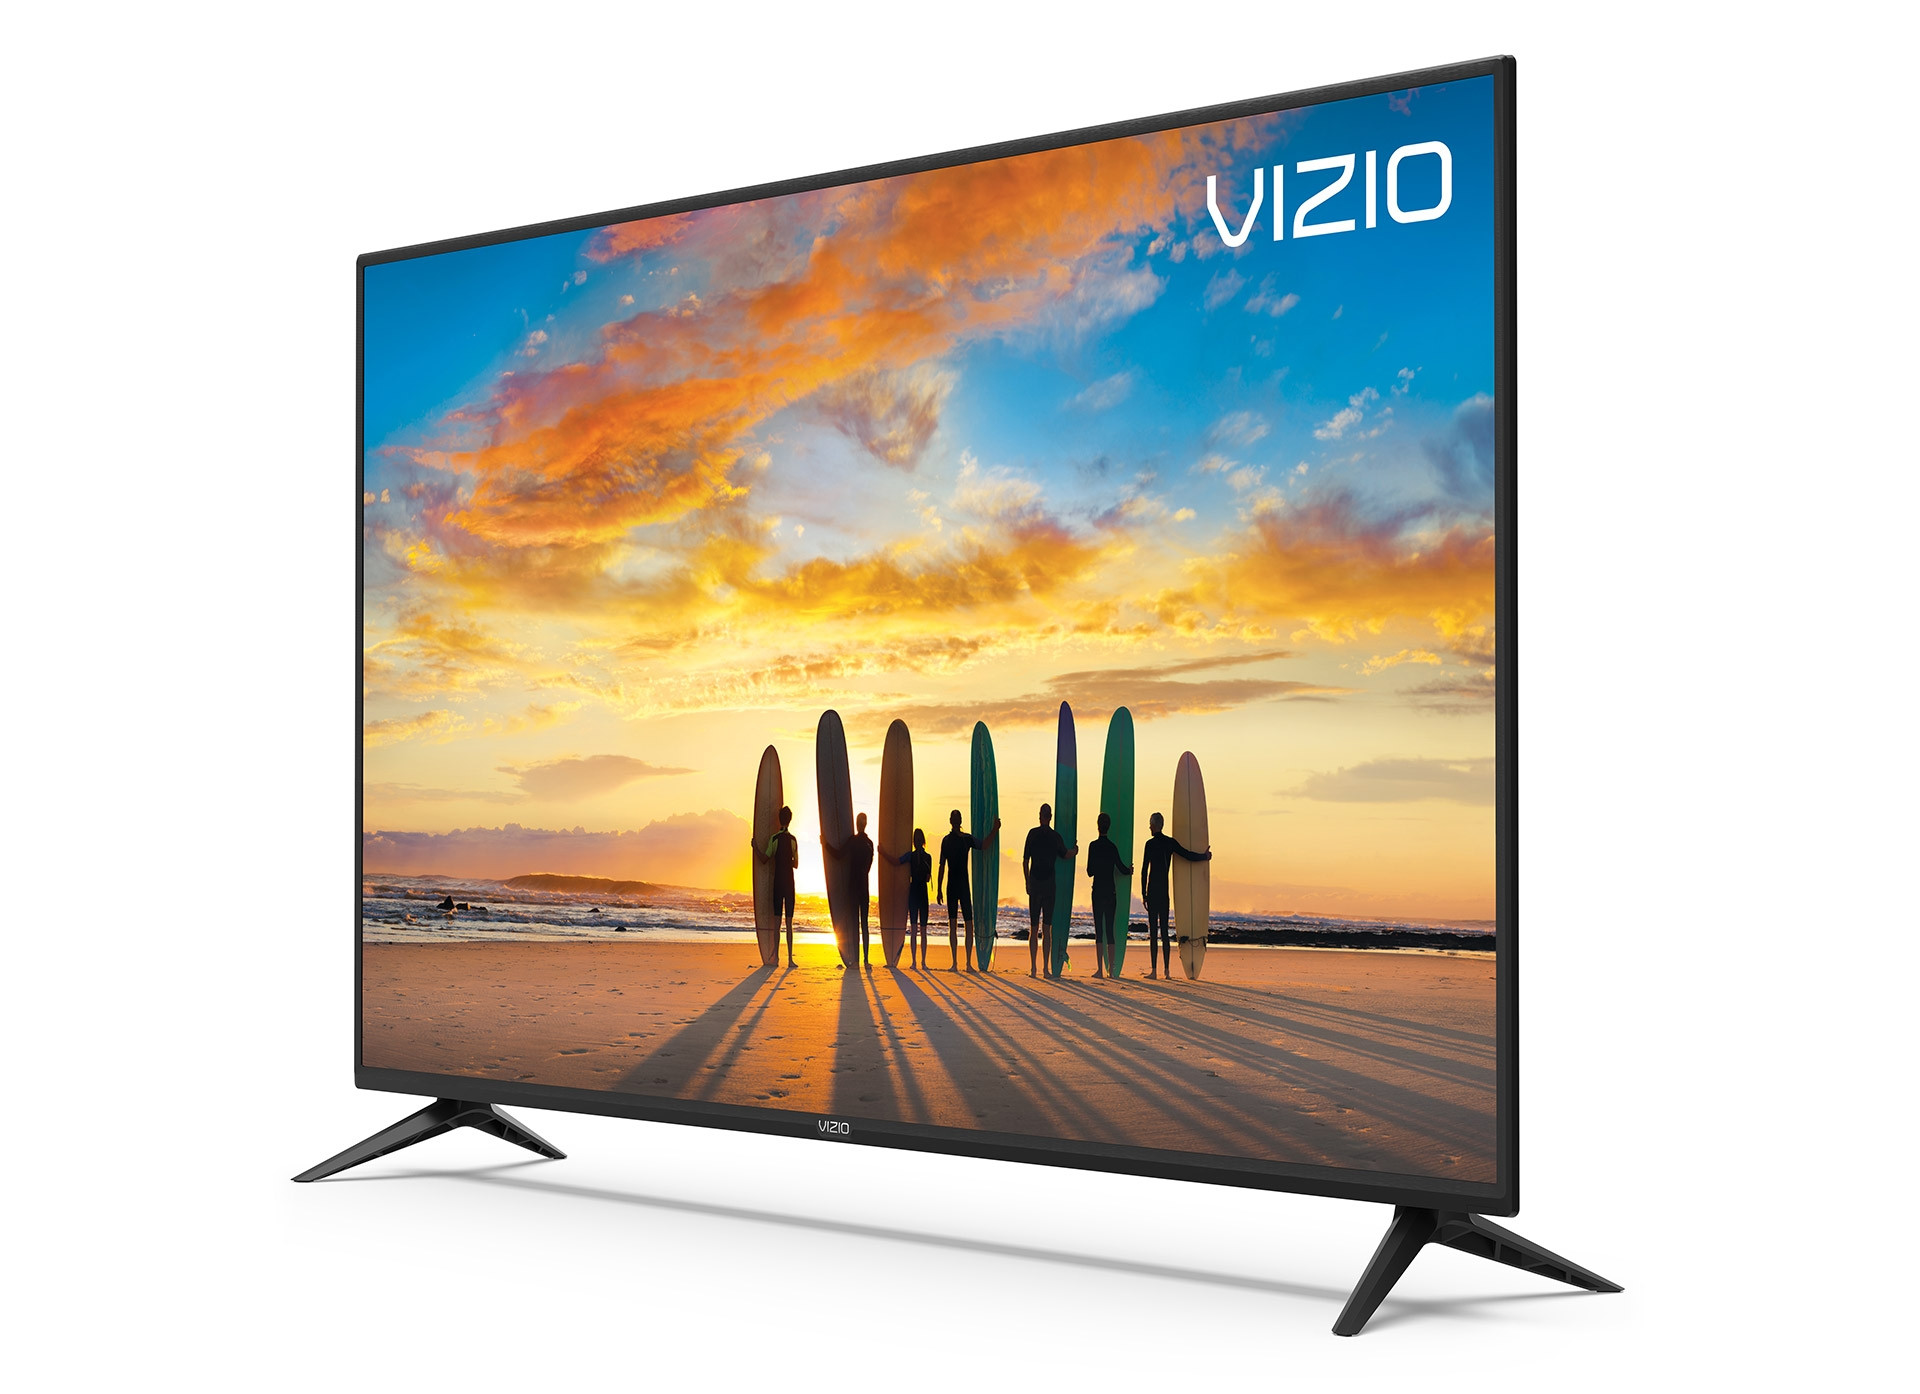 How to Set Your Vizio TV to 1080p